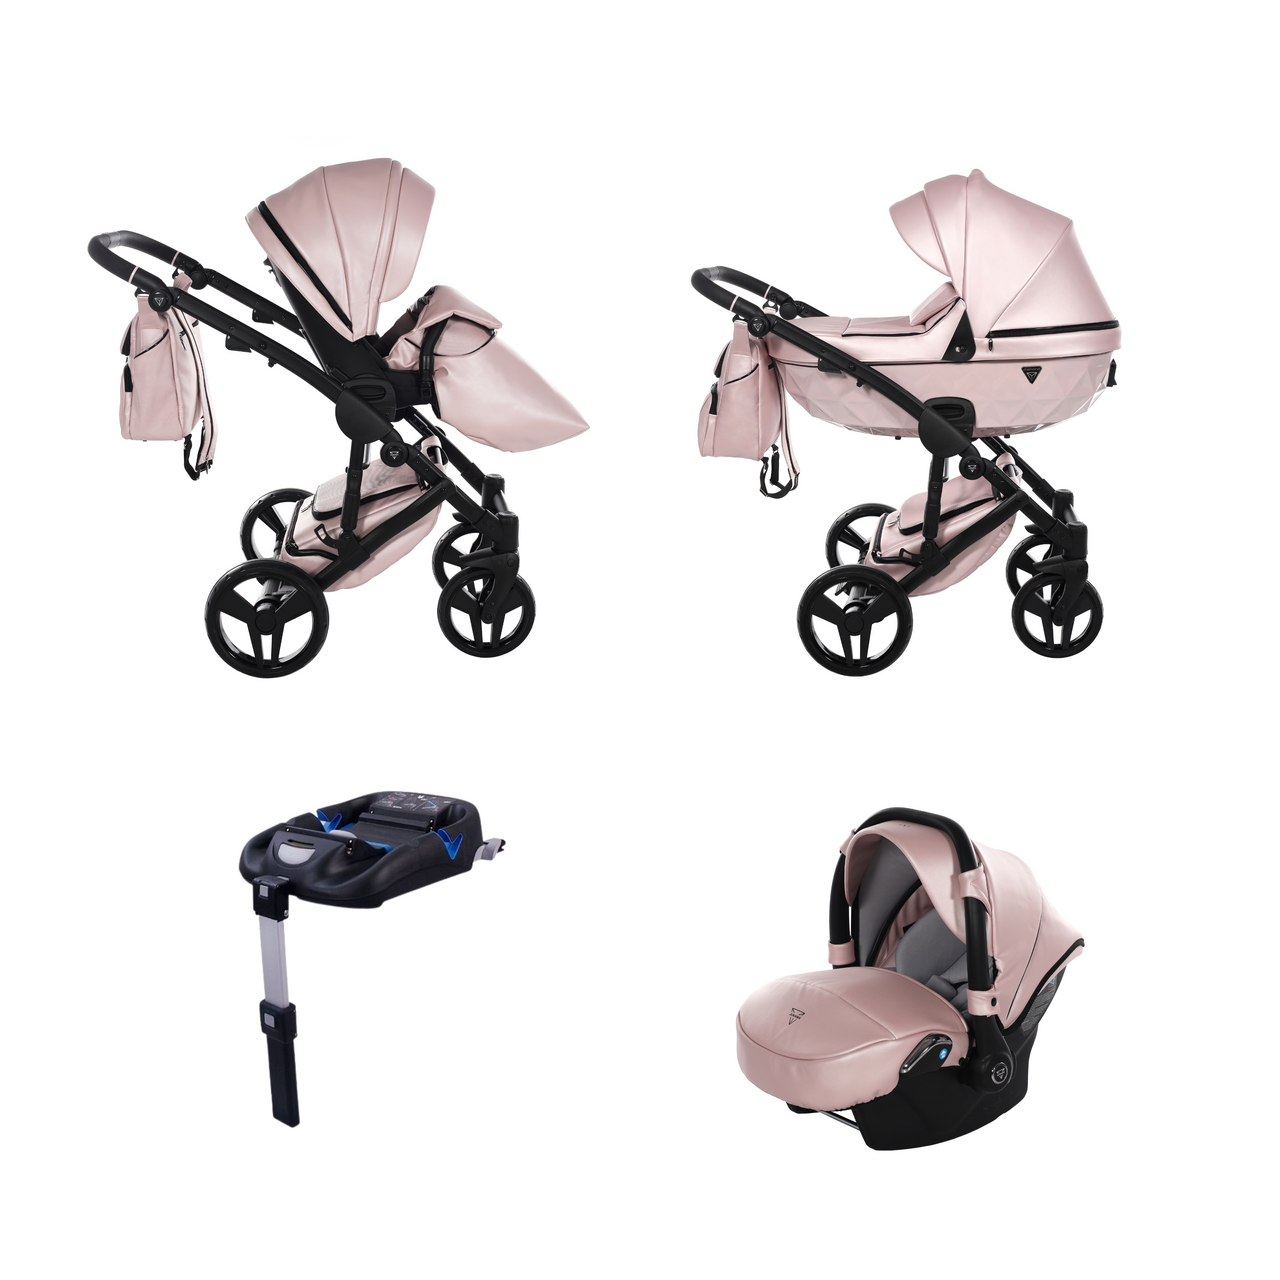 Junama S-Class 3 In 1 Travel System - Pink - For Your Little One